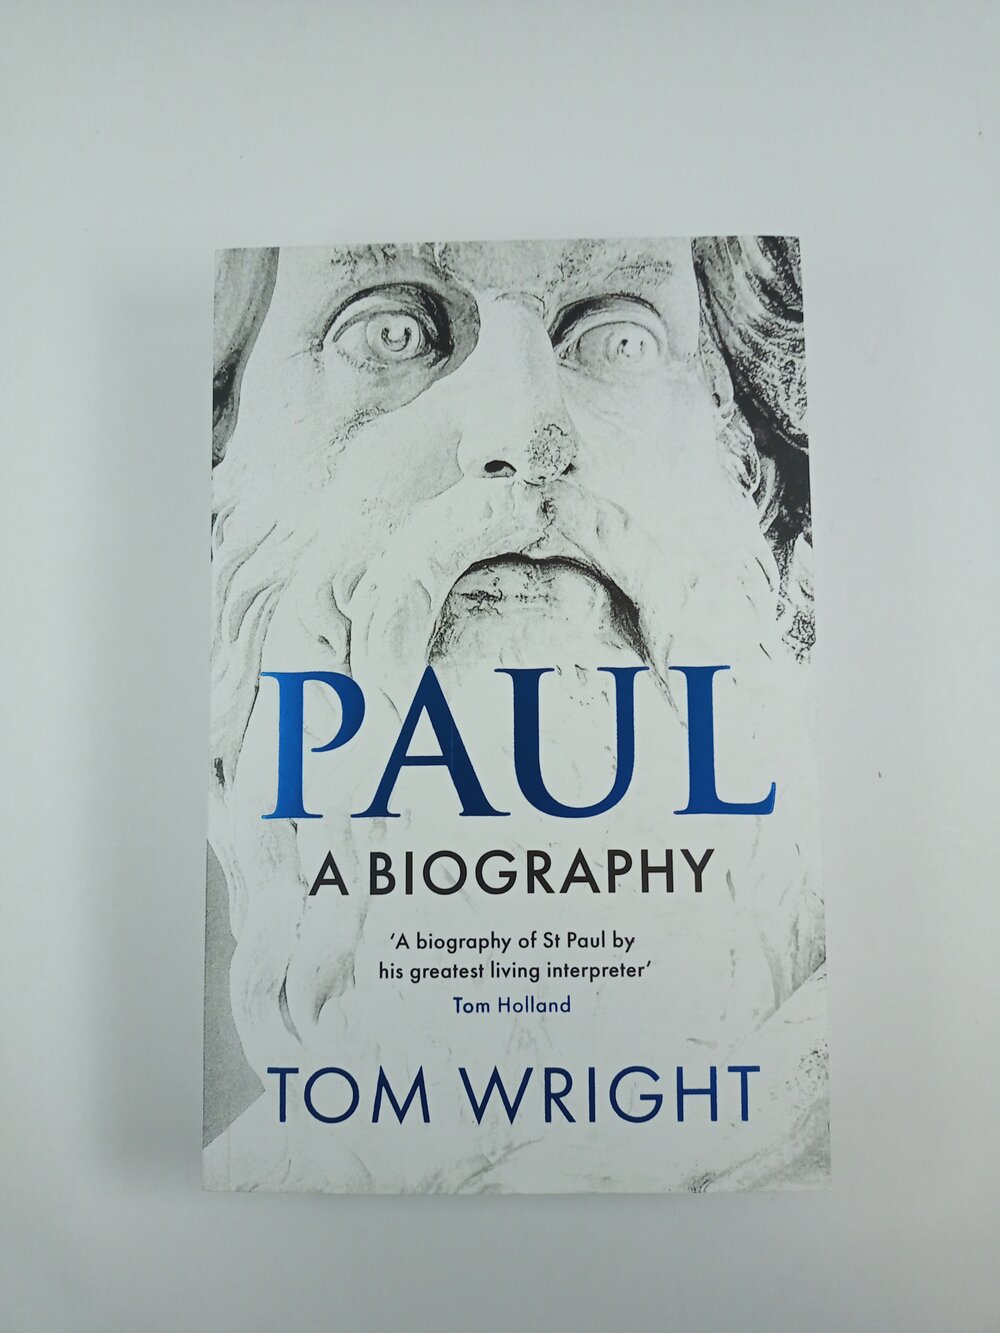 Biography　by　Bridge　Wright　Paul　Tom　—　A　Paperback　Books